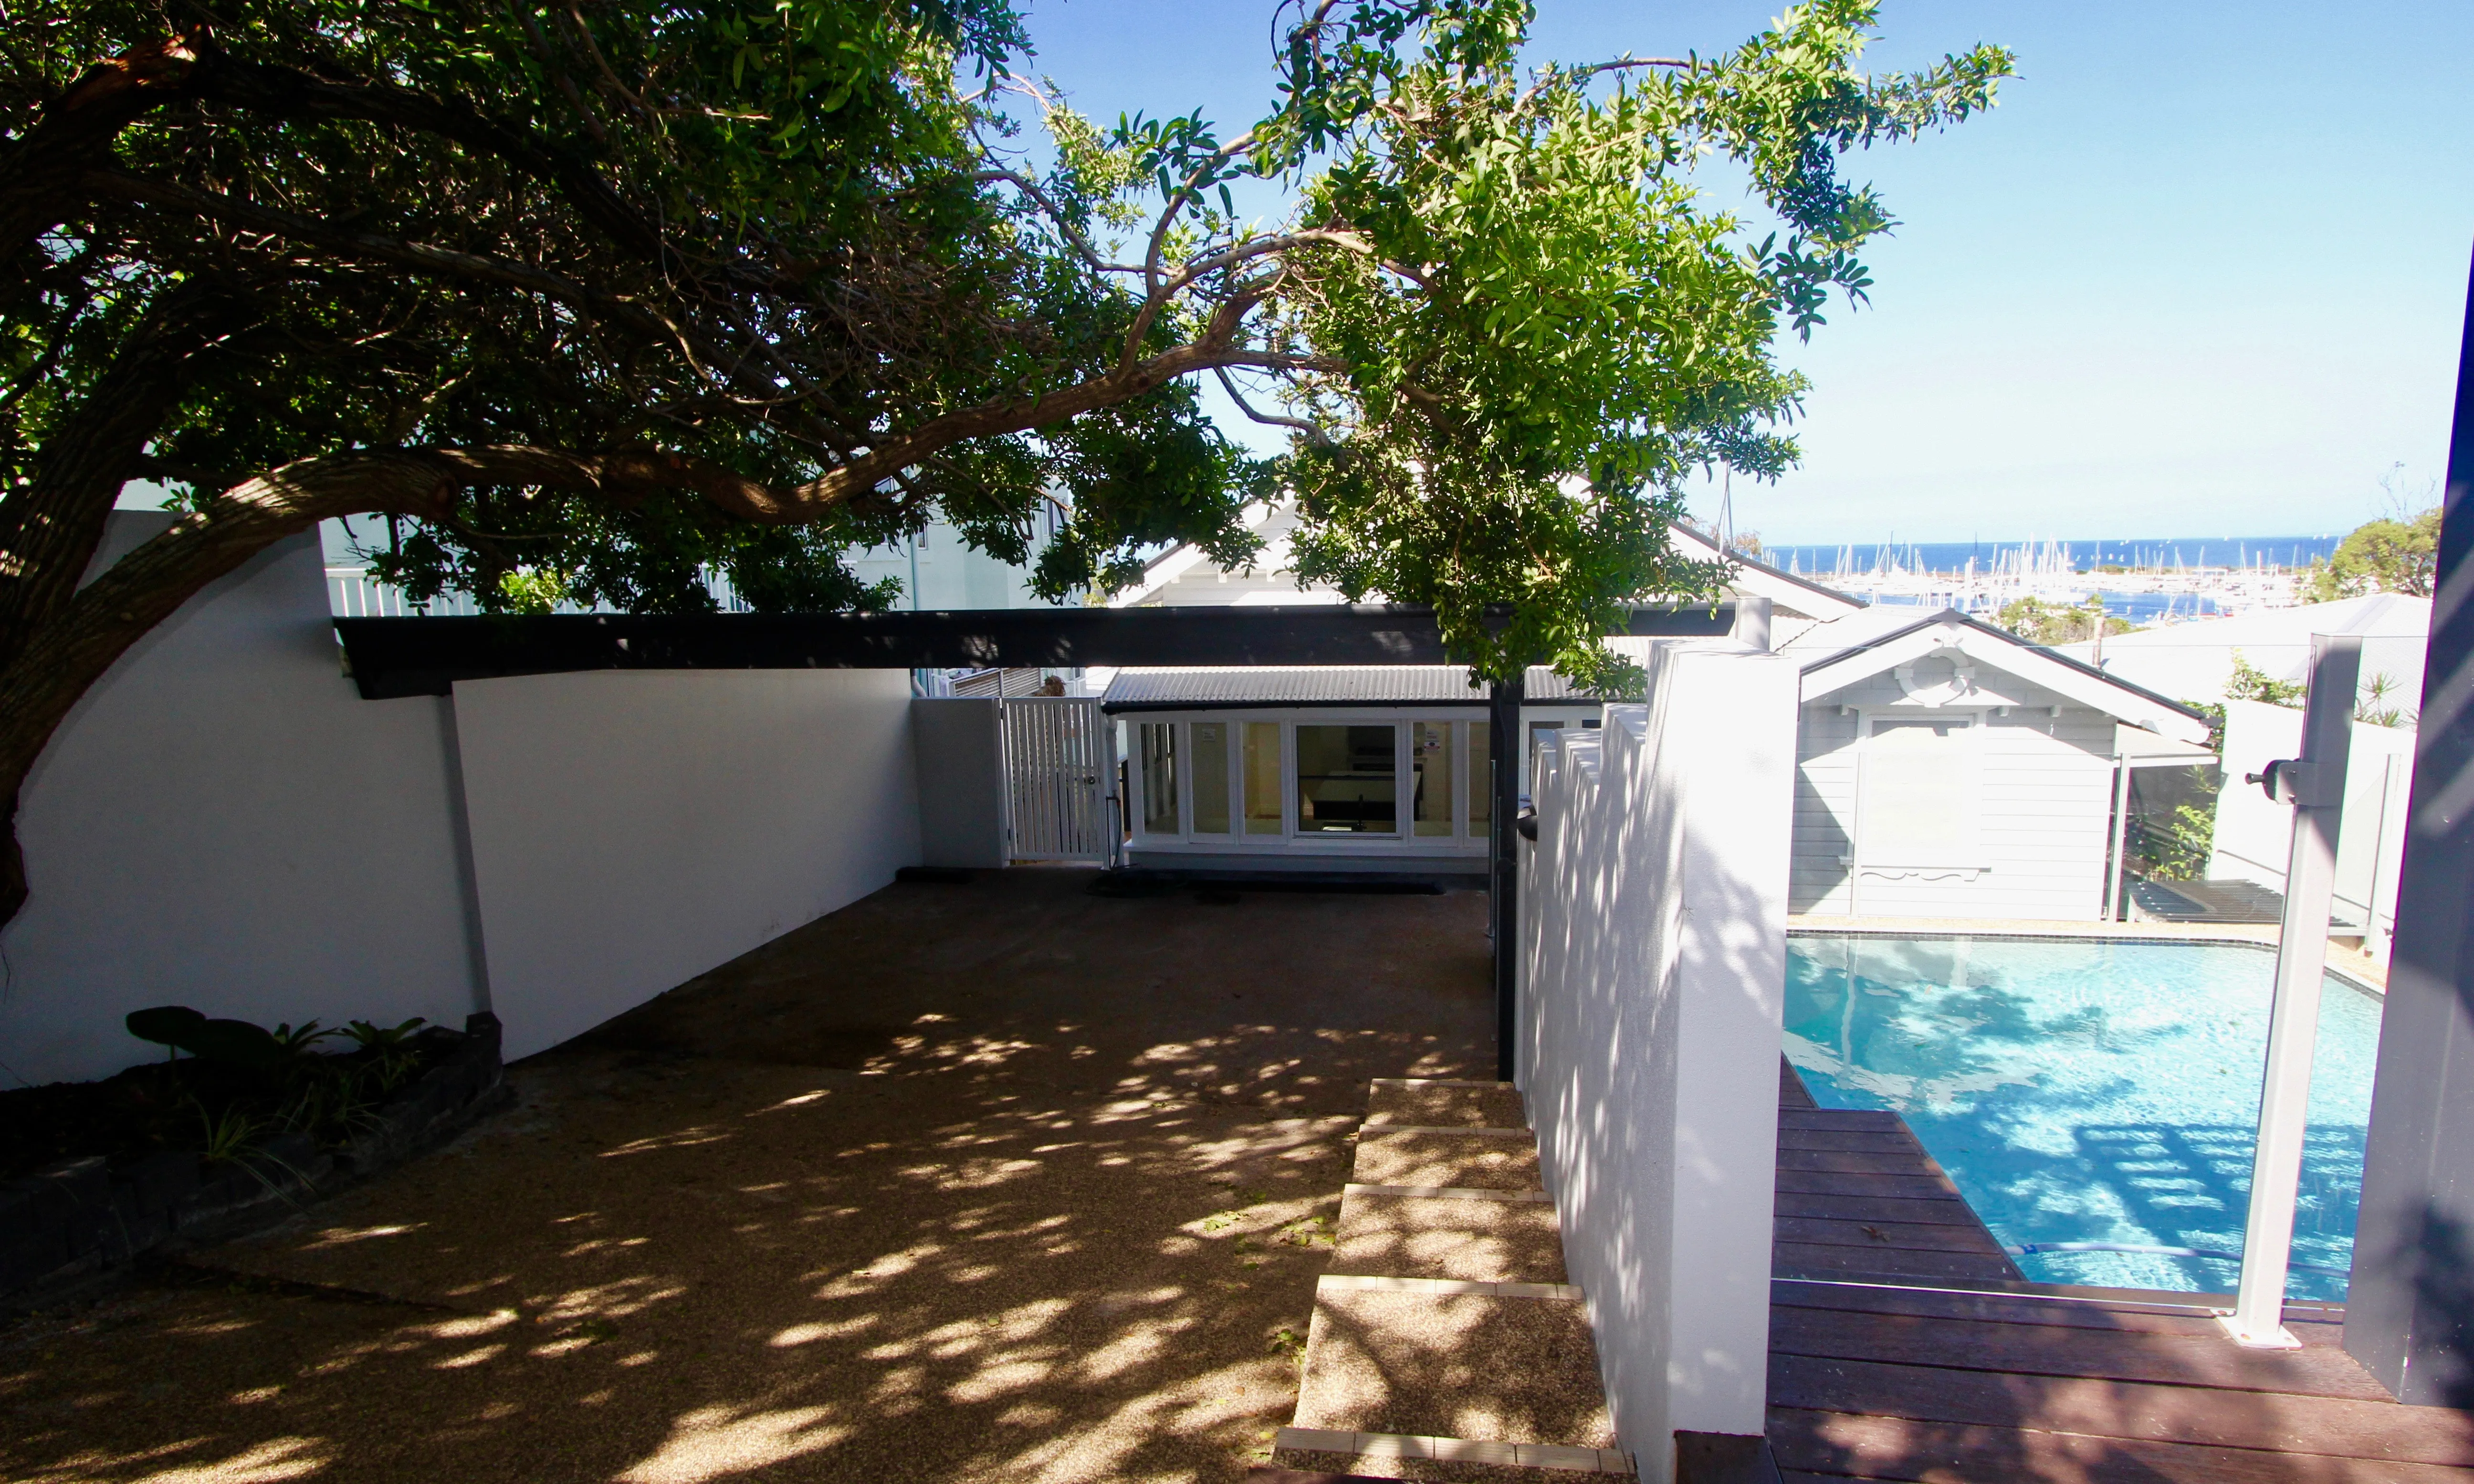 Carport and in-ground pool